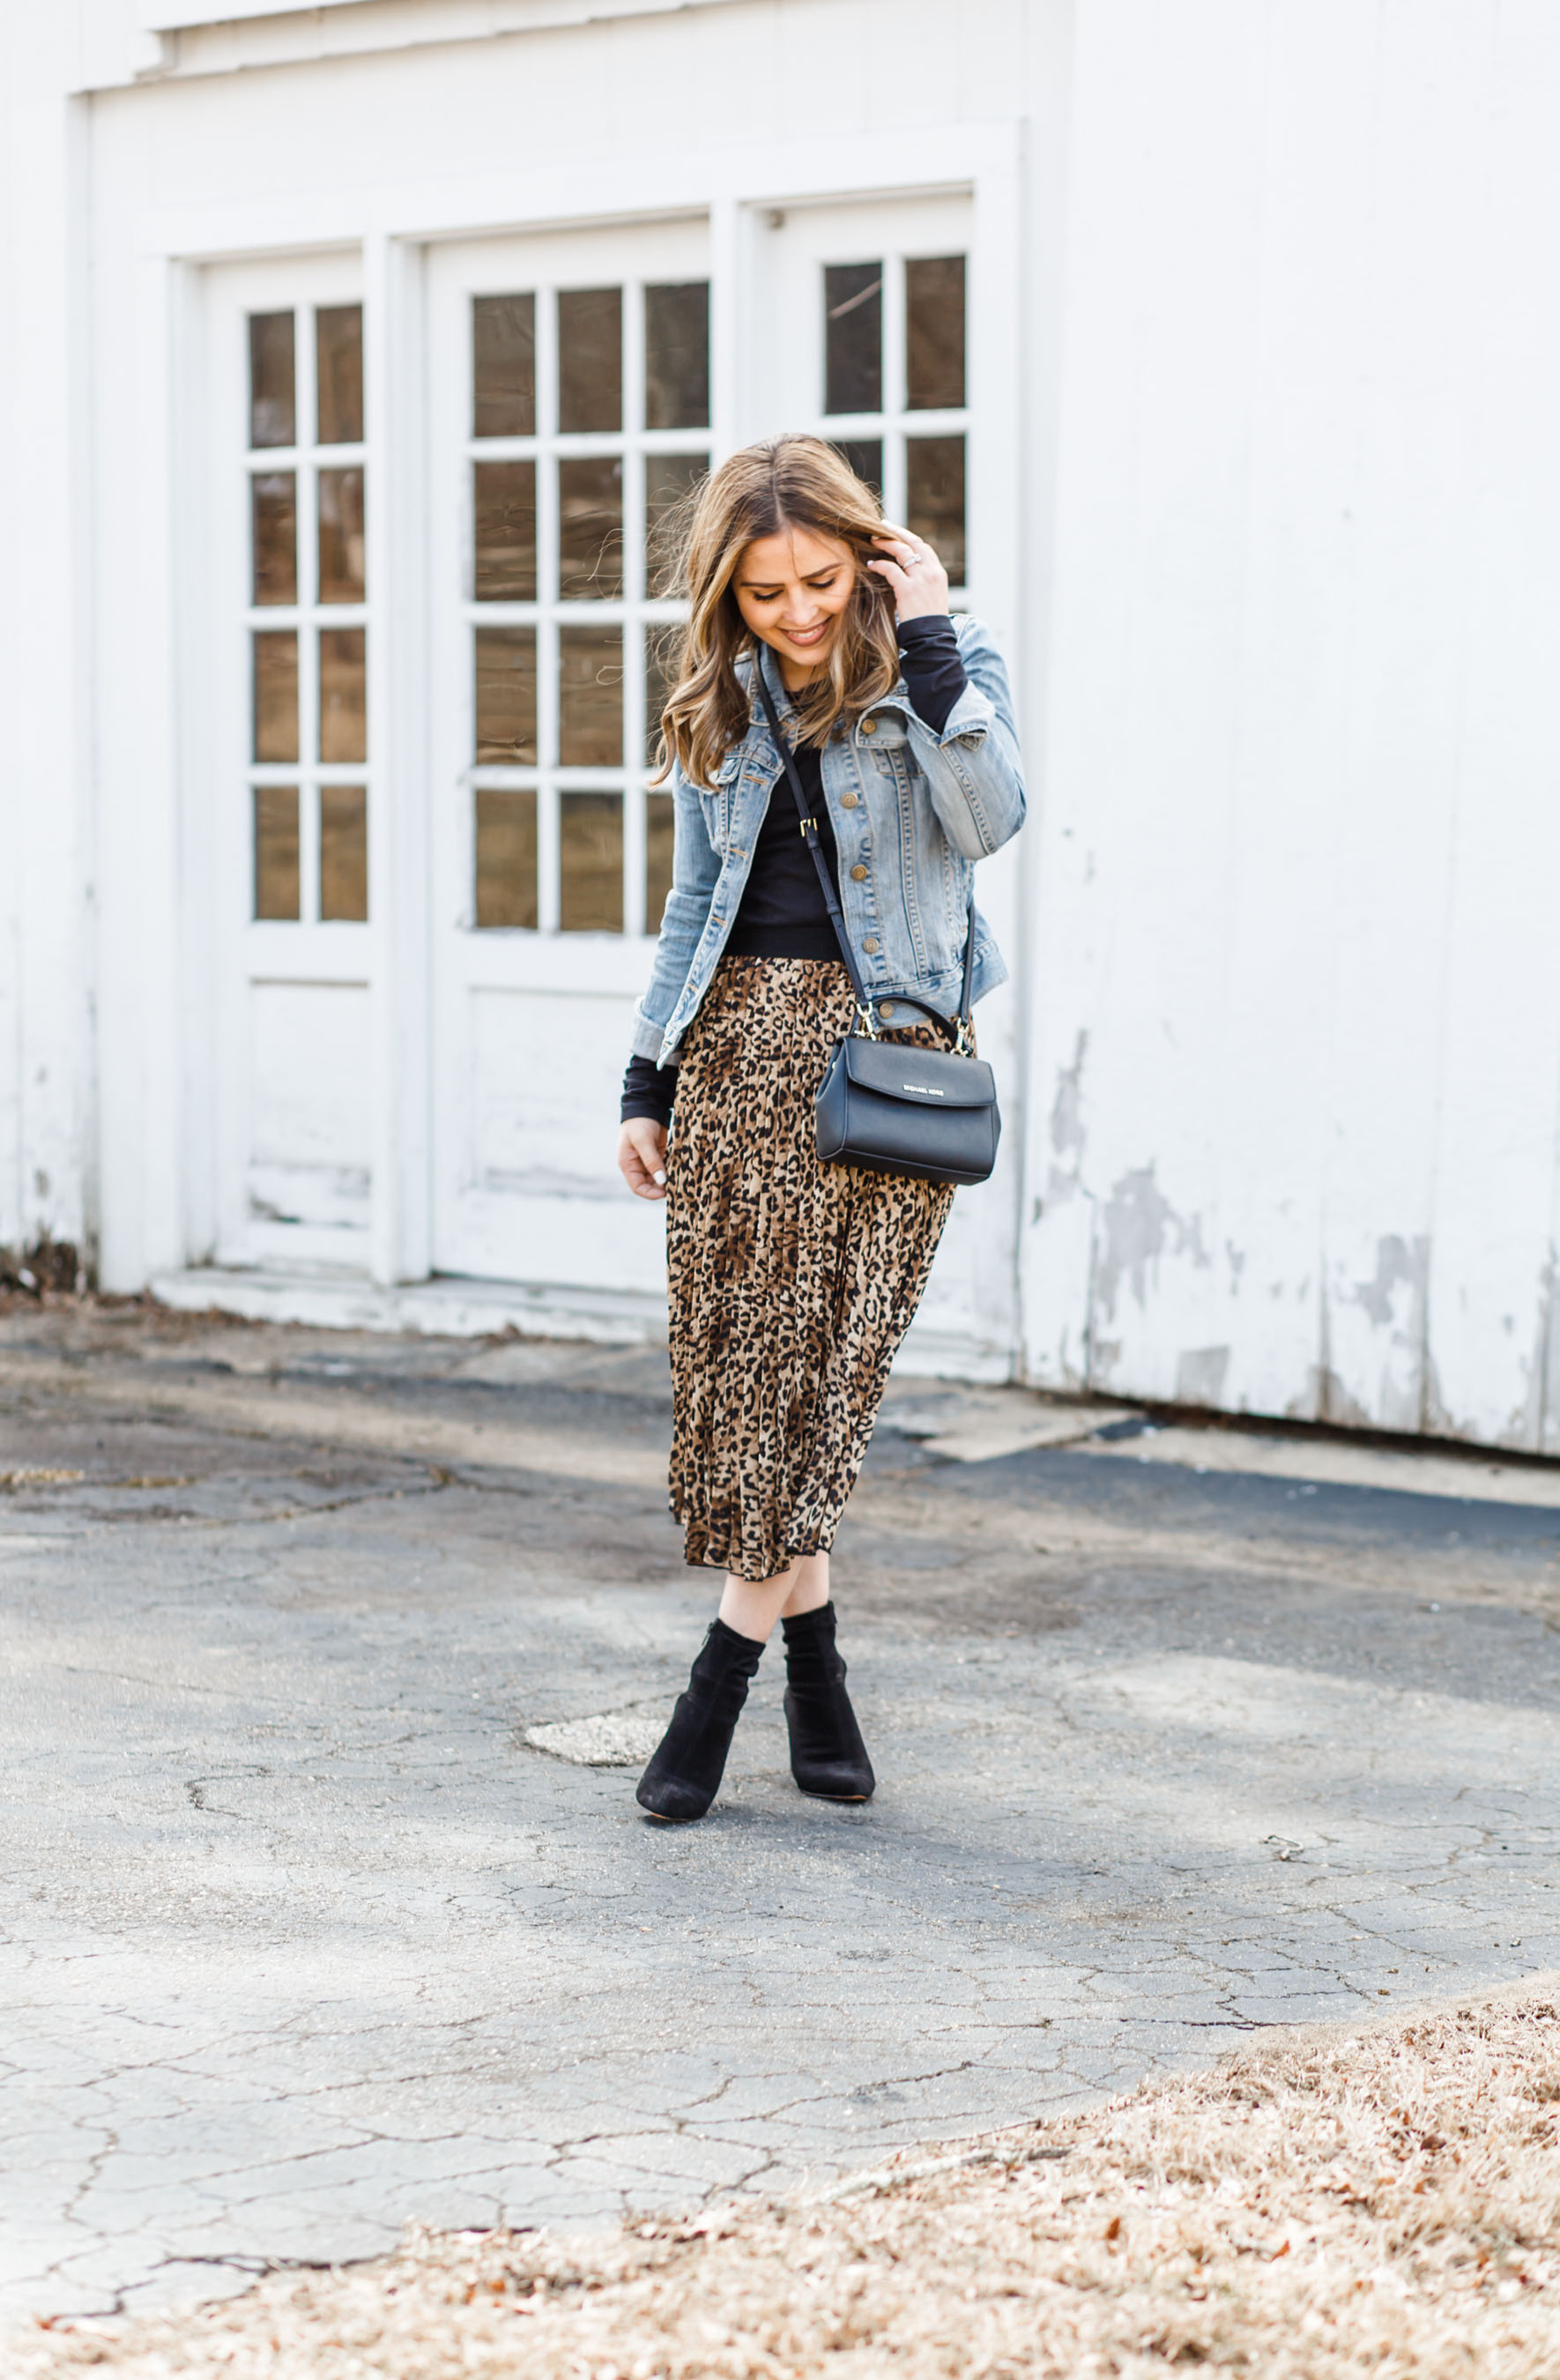 OOTD: sequin mini shorts with leopard print coat outfit #styletips